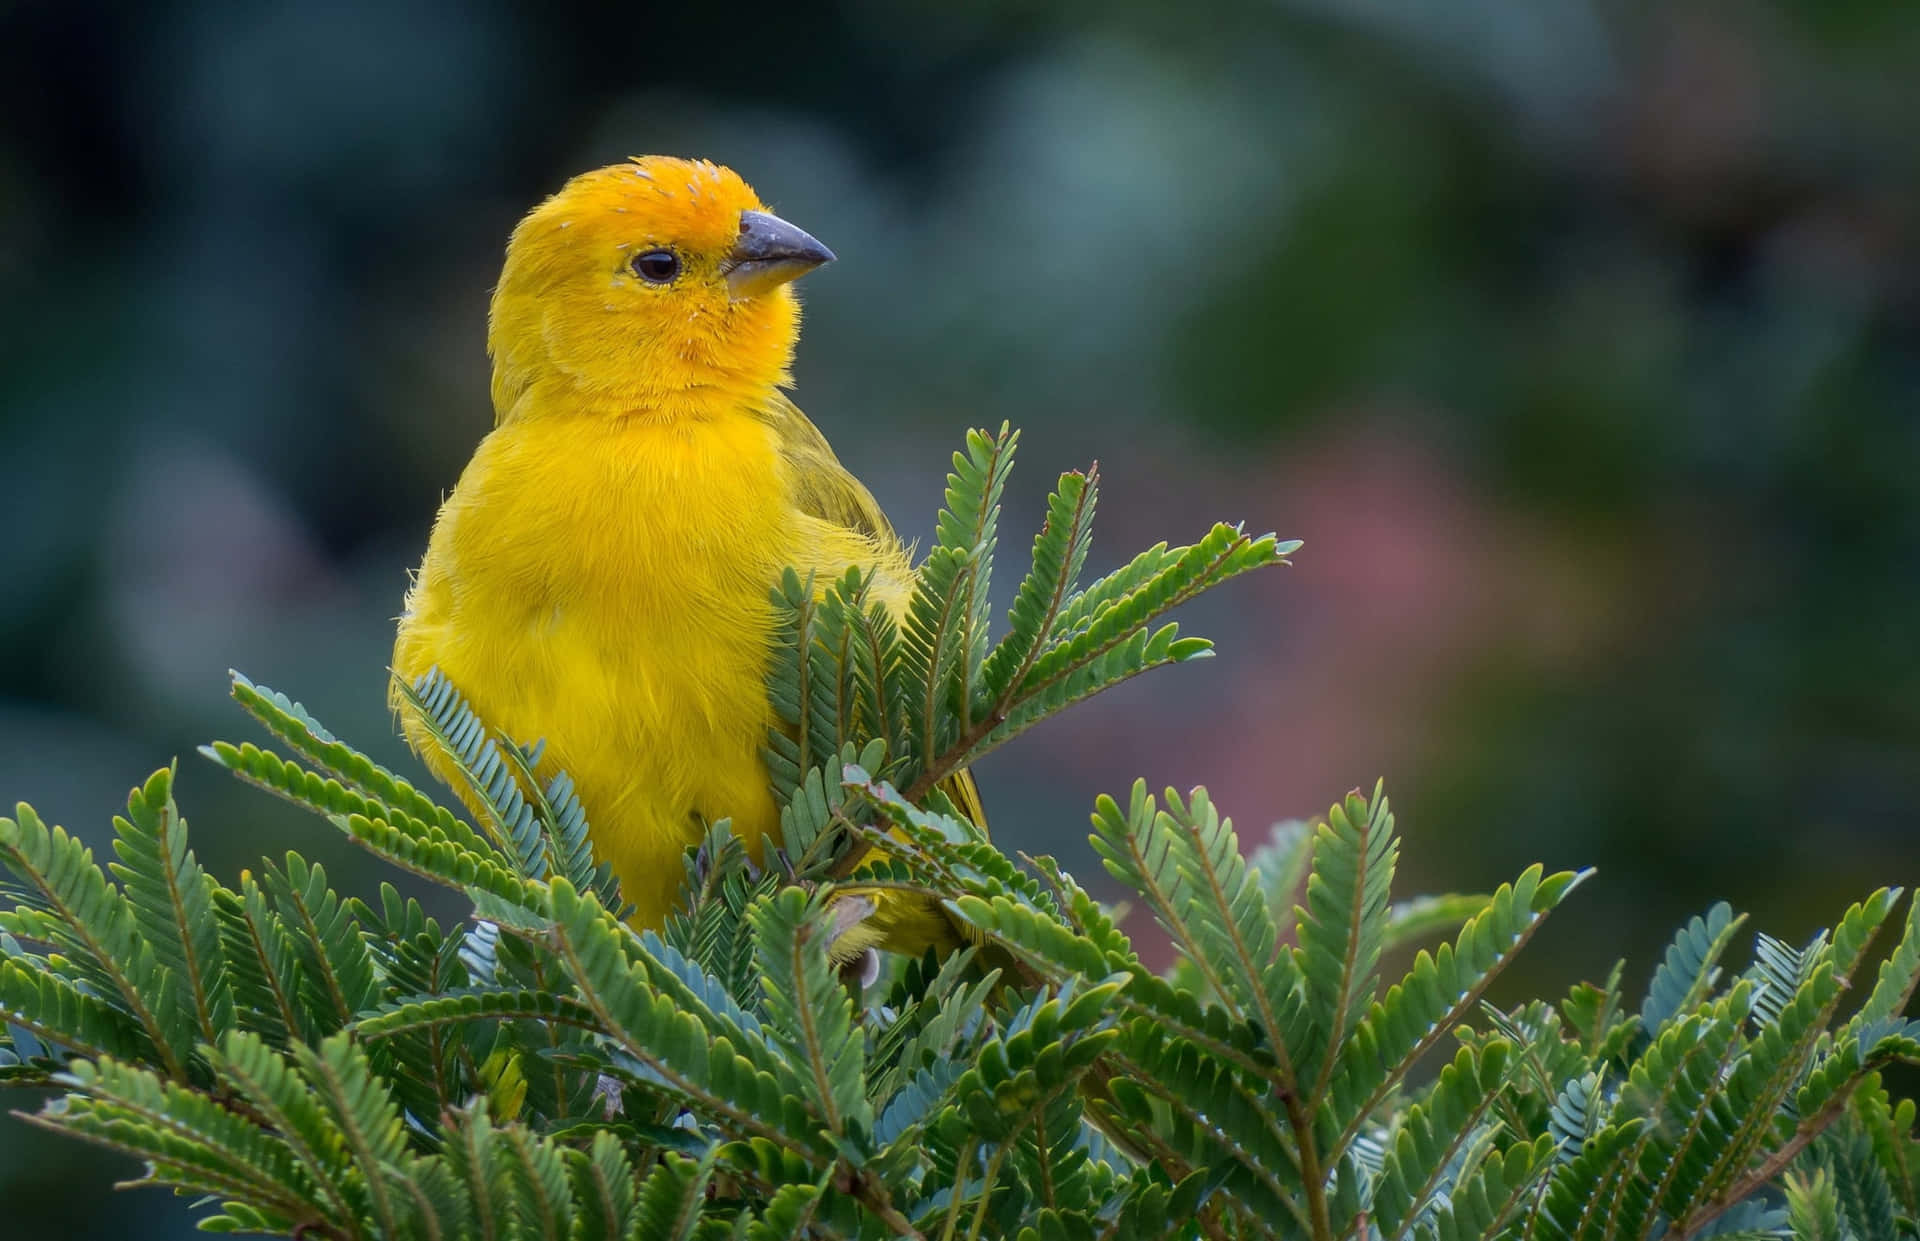 Vibrant Yellow Canary Perched in Nature Wallpaper